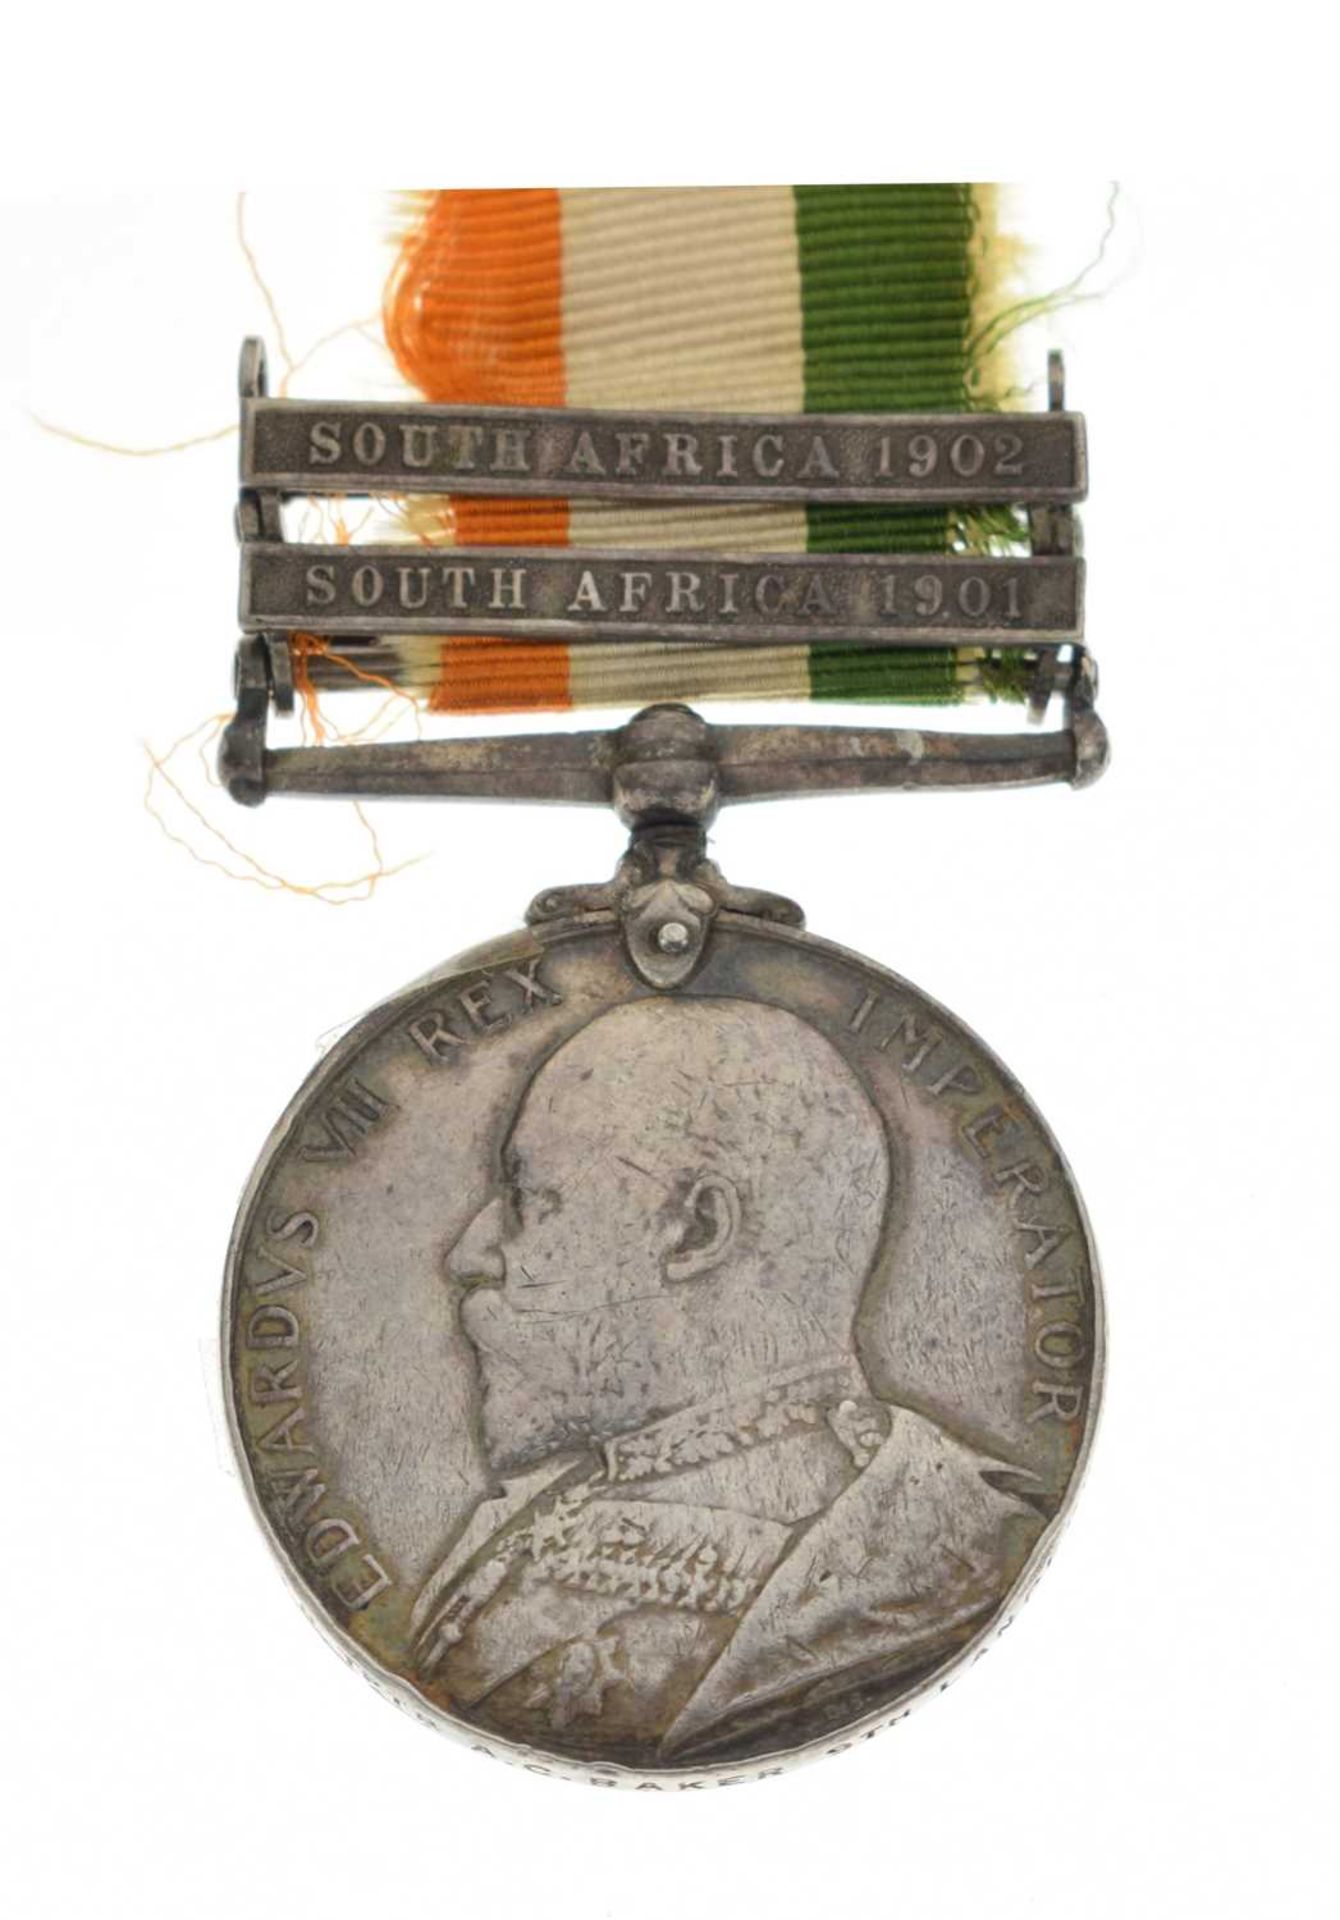 King’s South Africa Medal 1901-1902